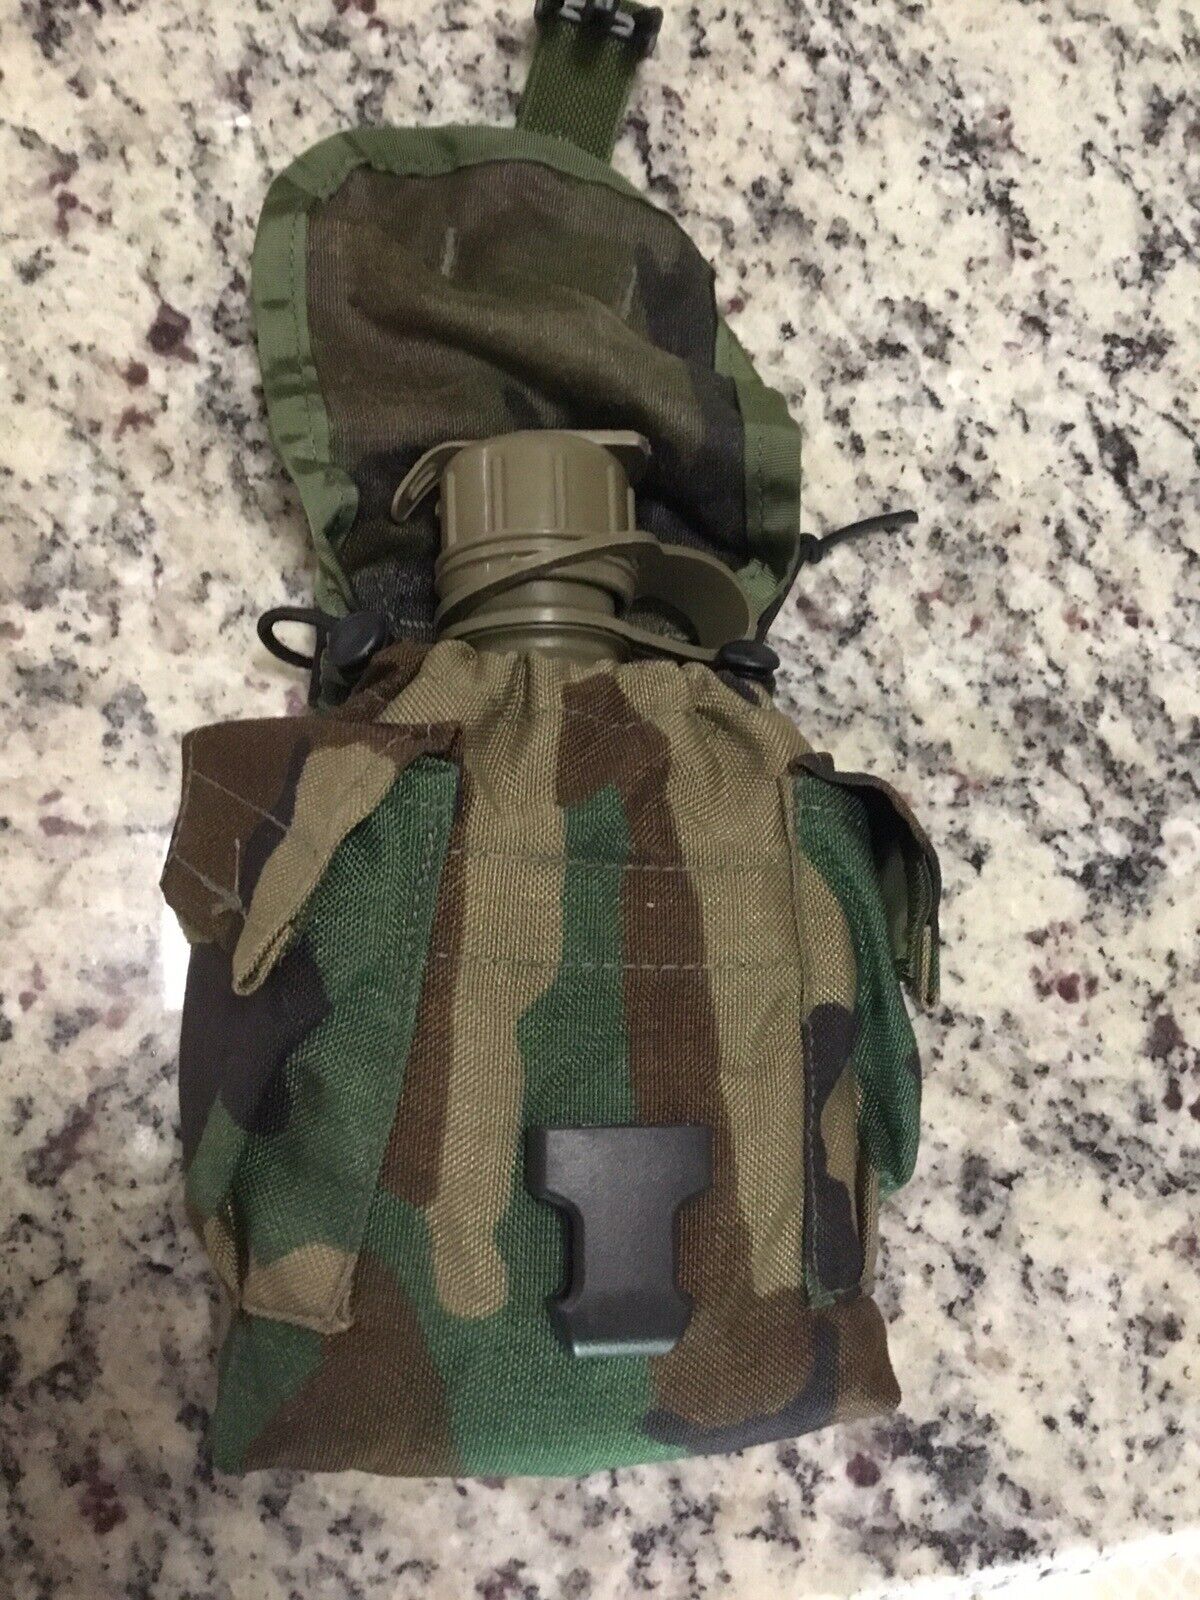 MOLLE Canteen Pouch With Canteen. BDU Bag. Woodland Camo Pouch